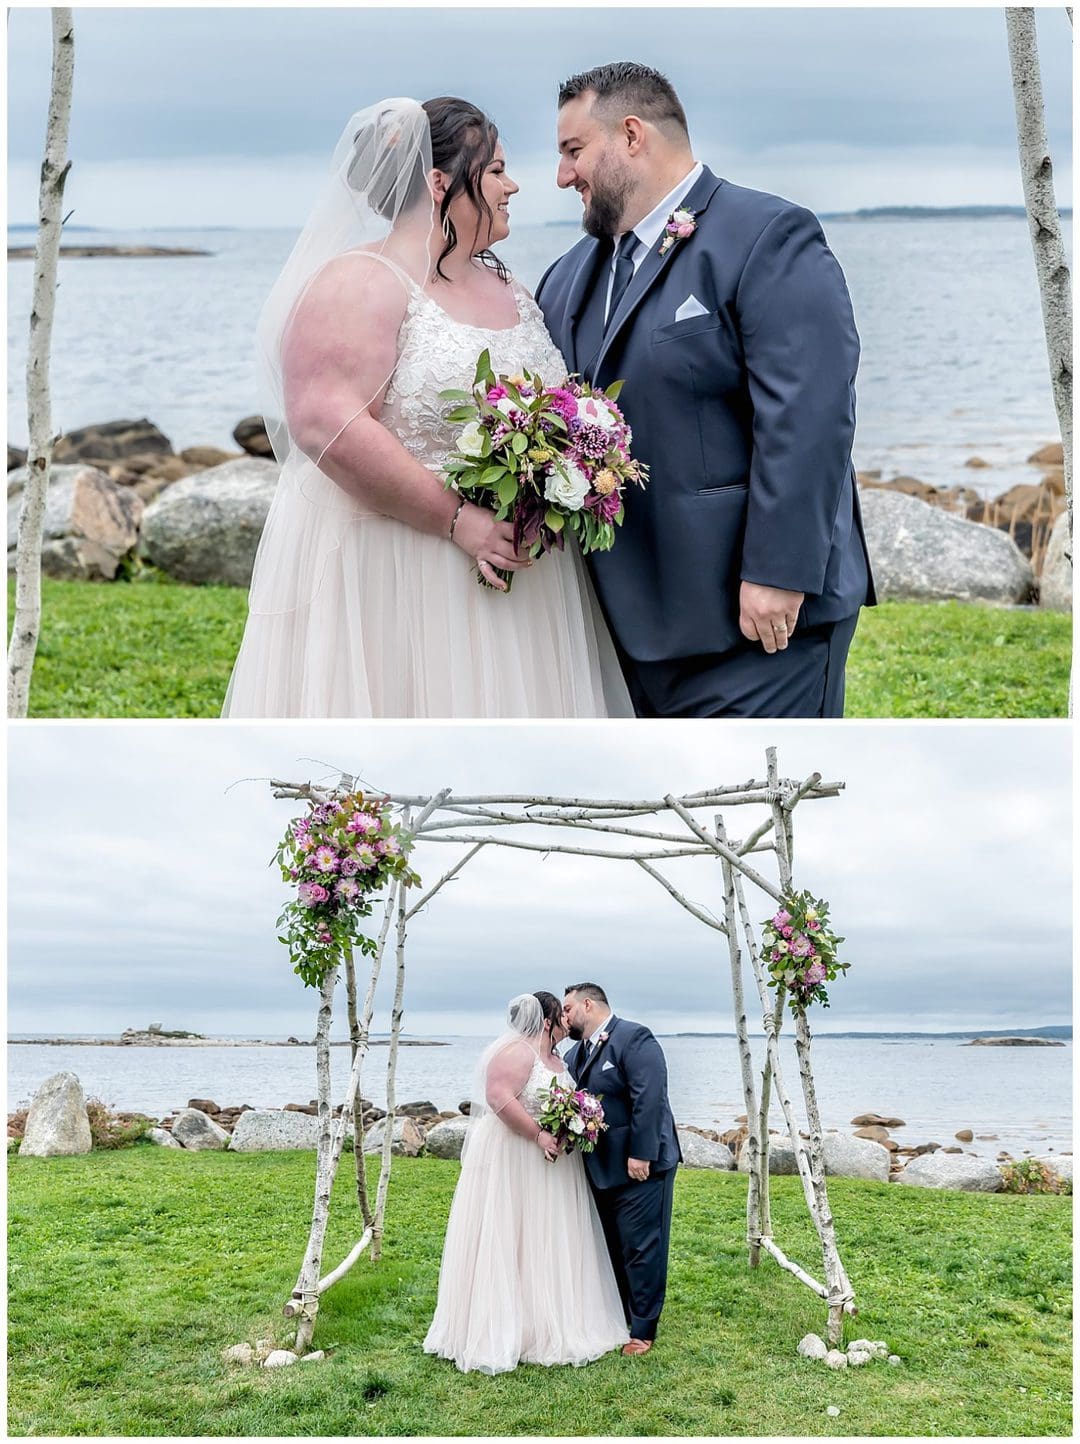 The bride and groom pose under the trellis for wedding photos at the Oceanstone Resort in NS.